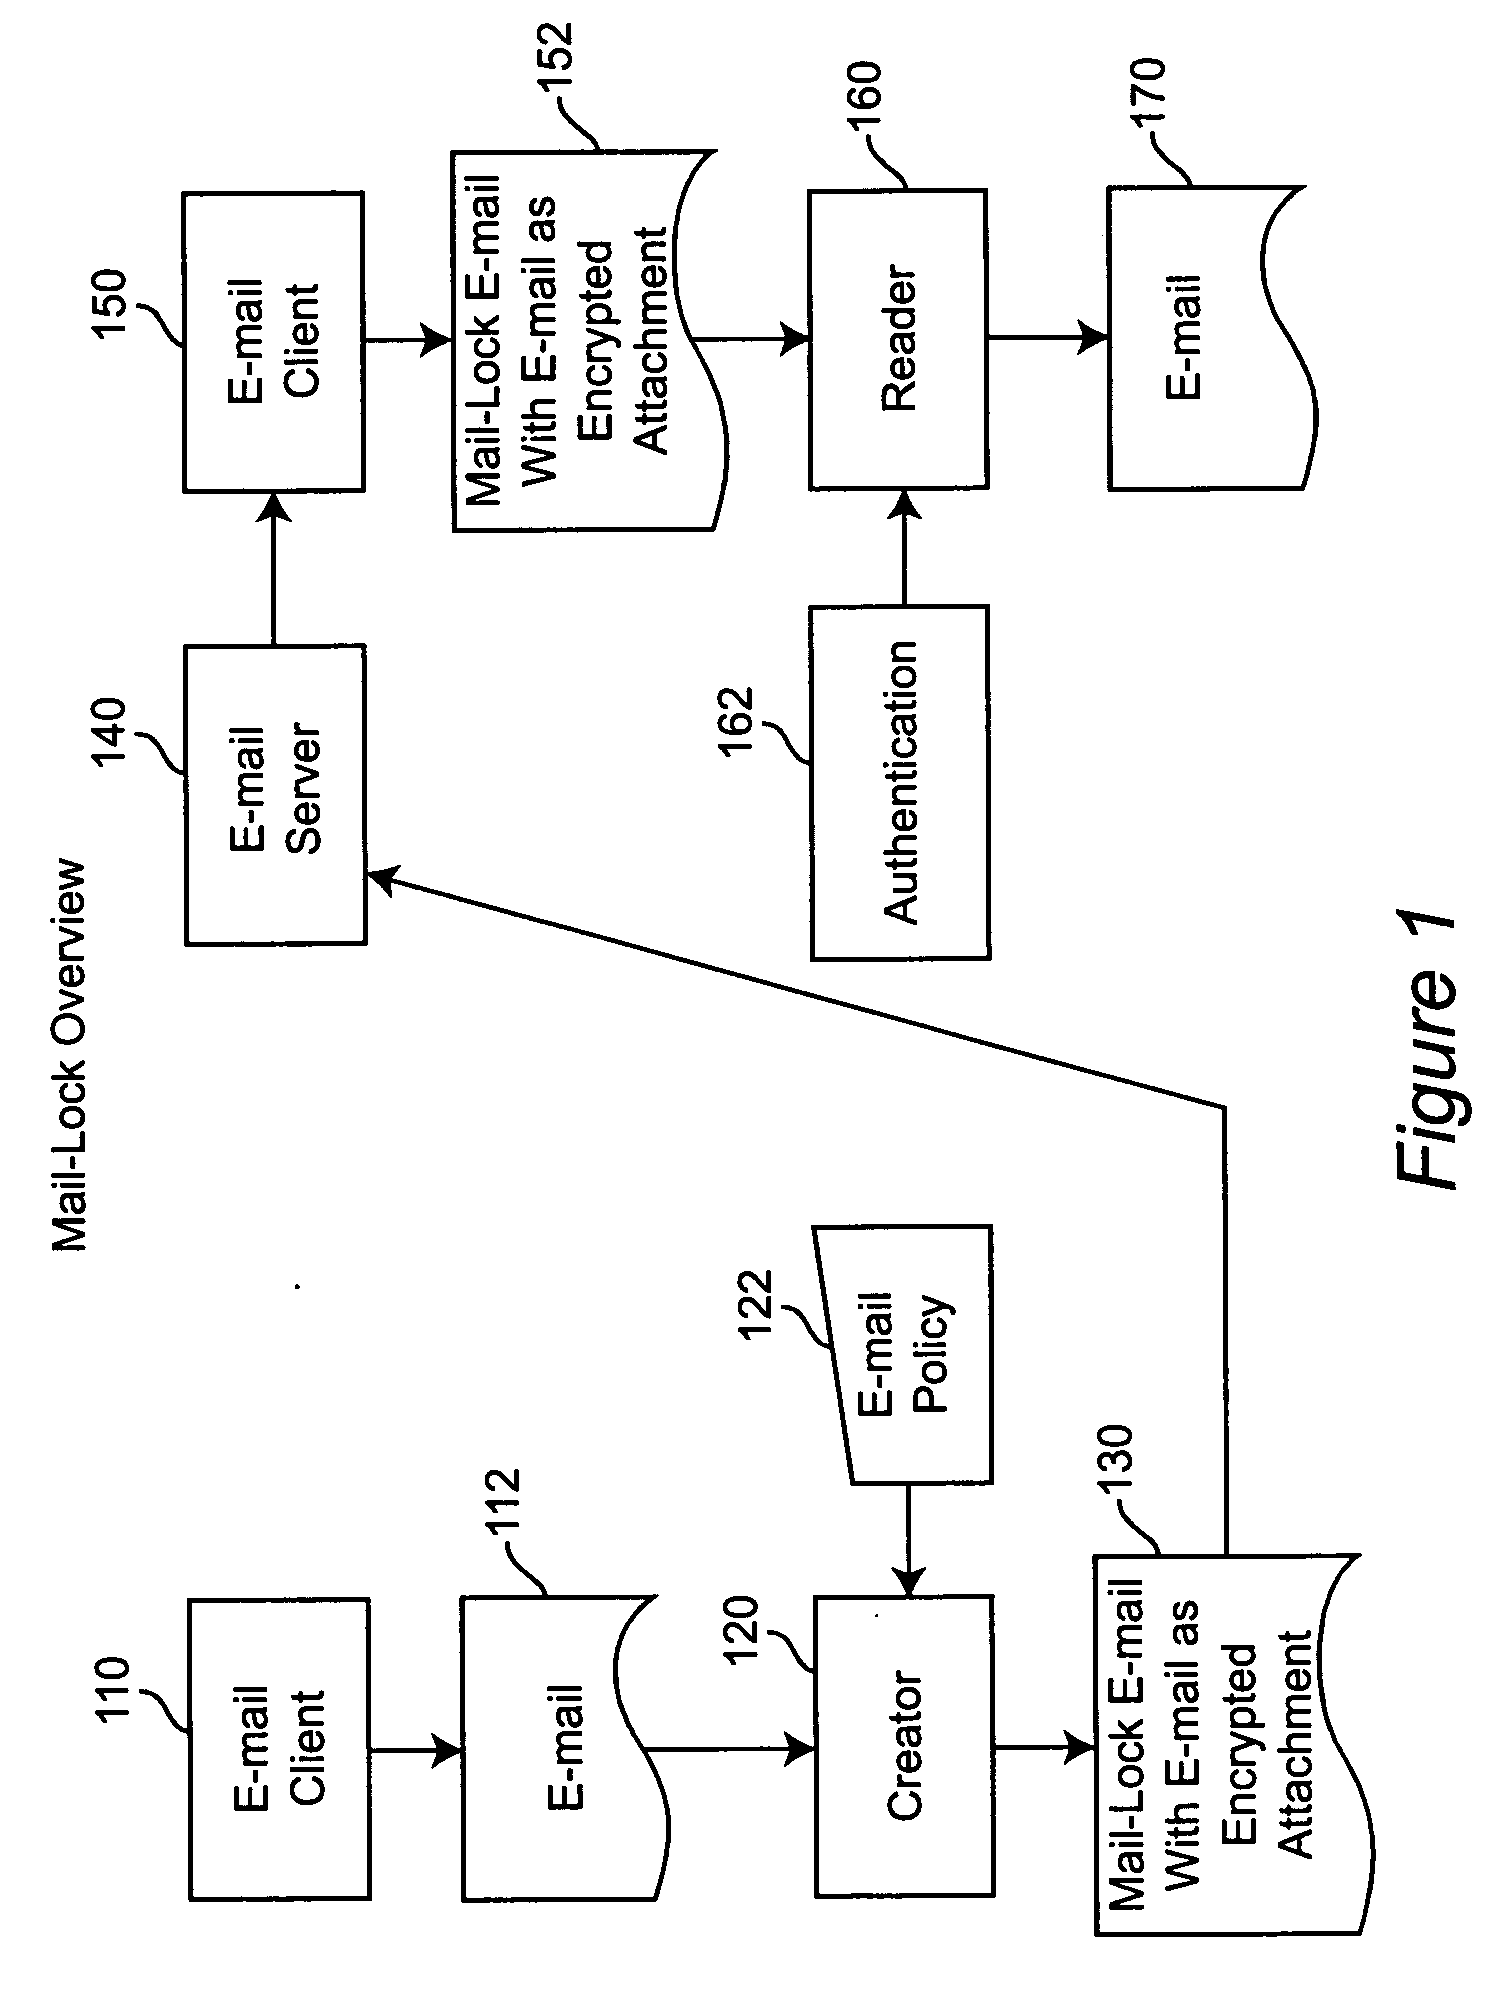 System and method for controlling the downstream preservation and destruction of electronic mail